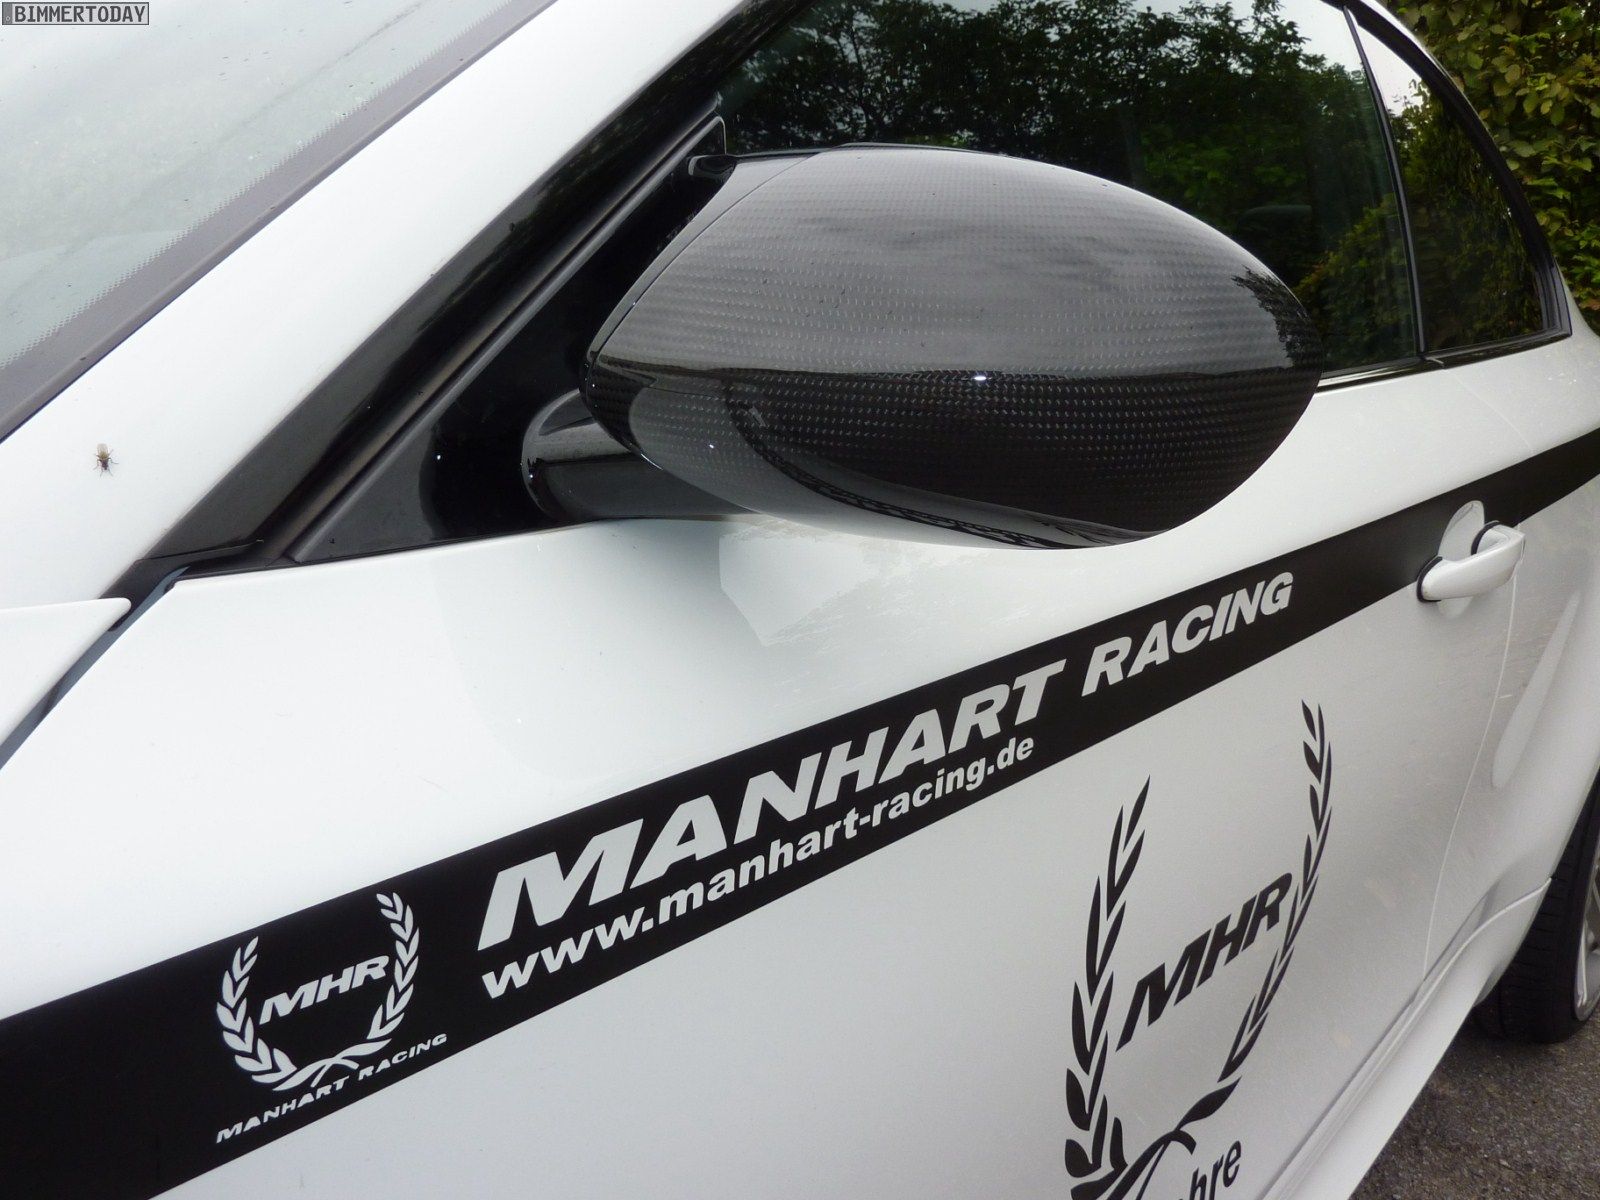 2012 BMW 1-Series M Coupe by Manhart Racing